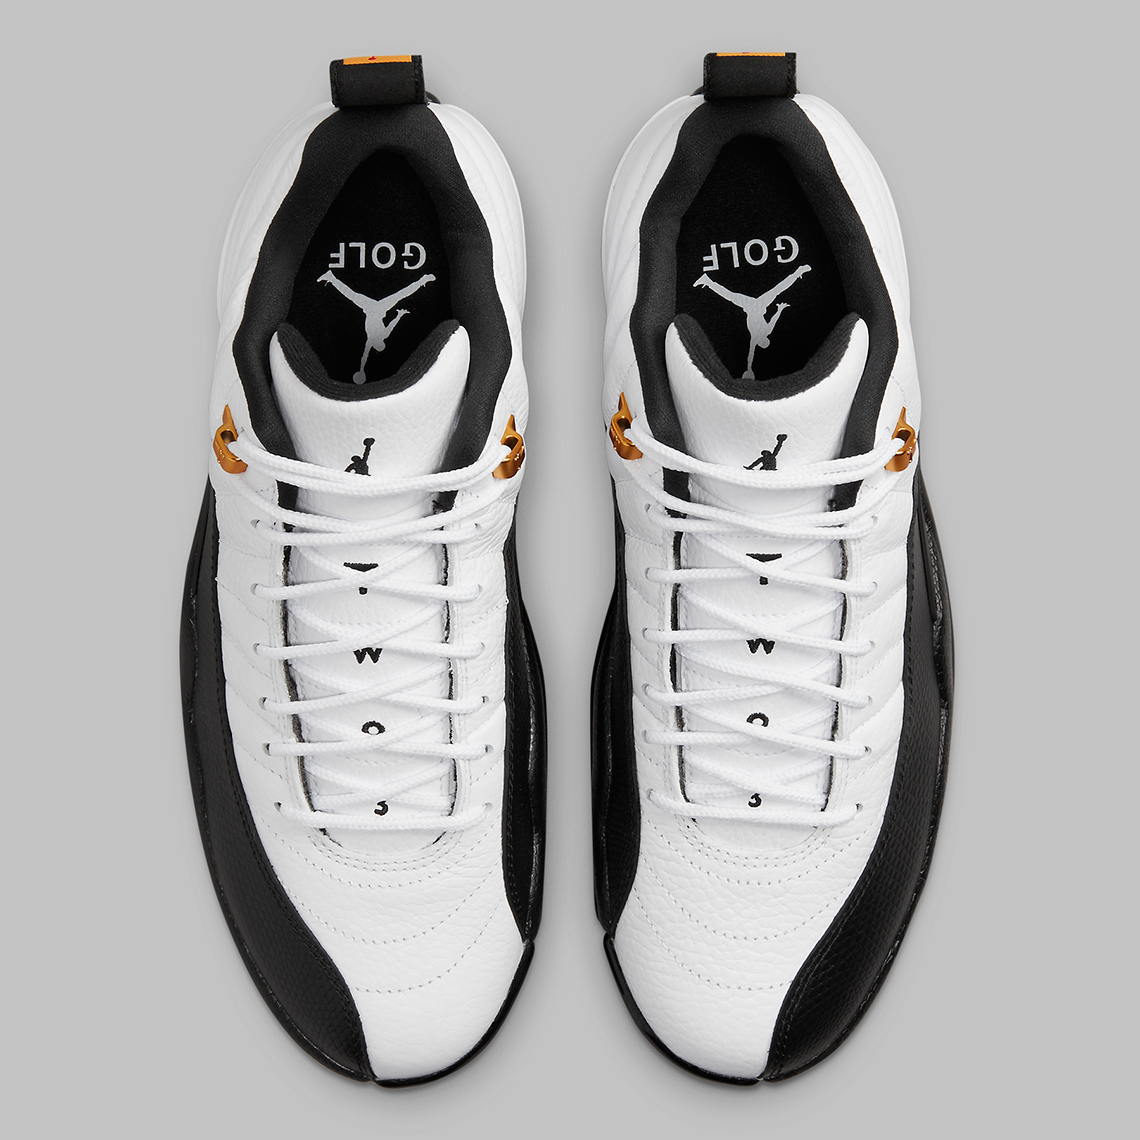 Air and Jordan Retro XIII 'Playoff' New Images Golf Taxi Official Images 5